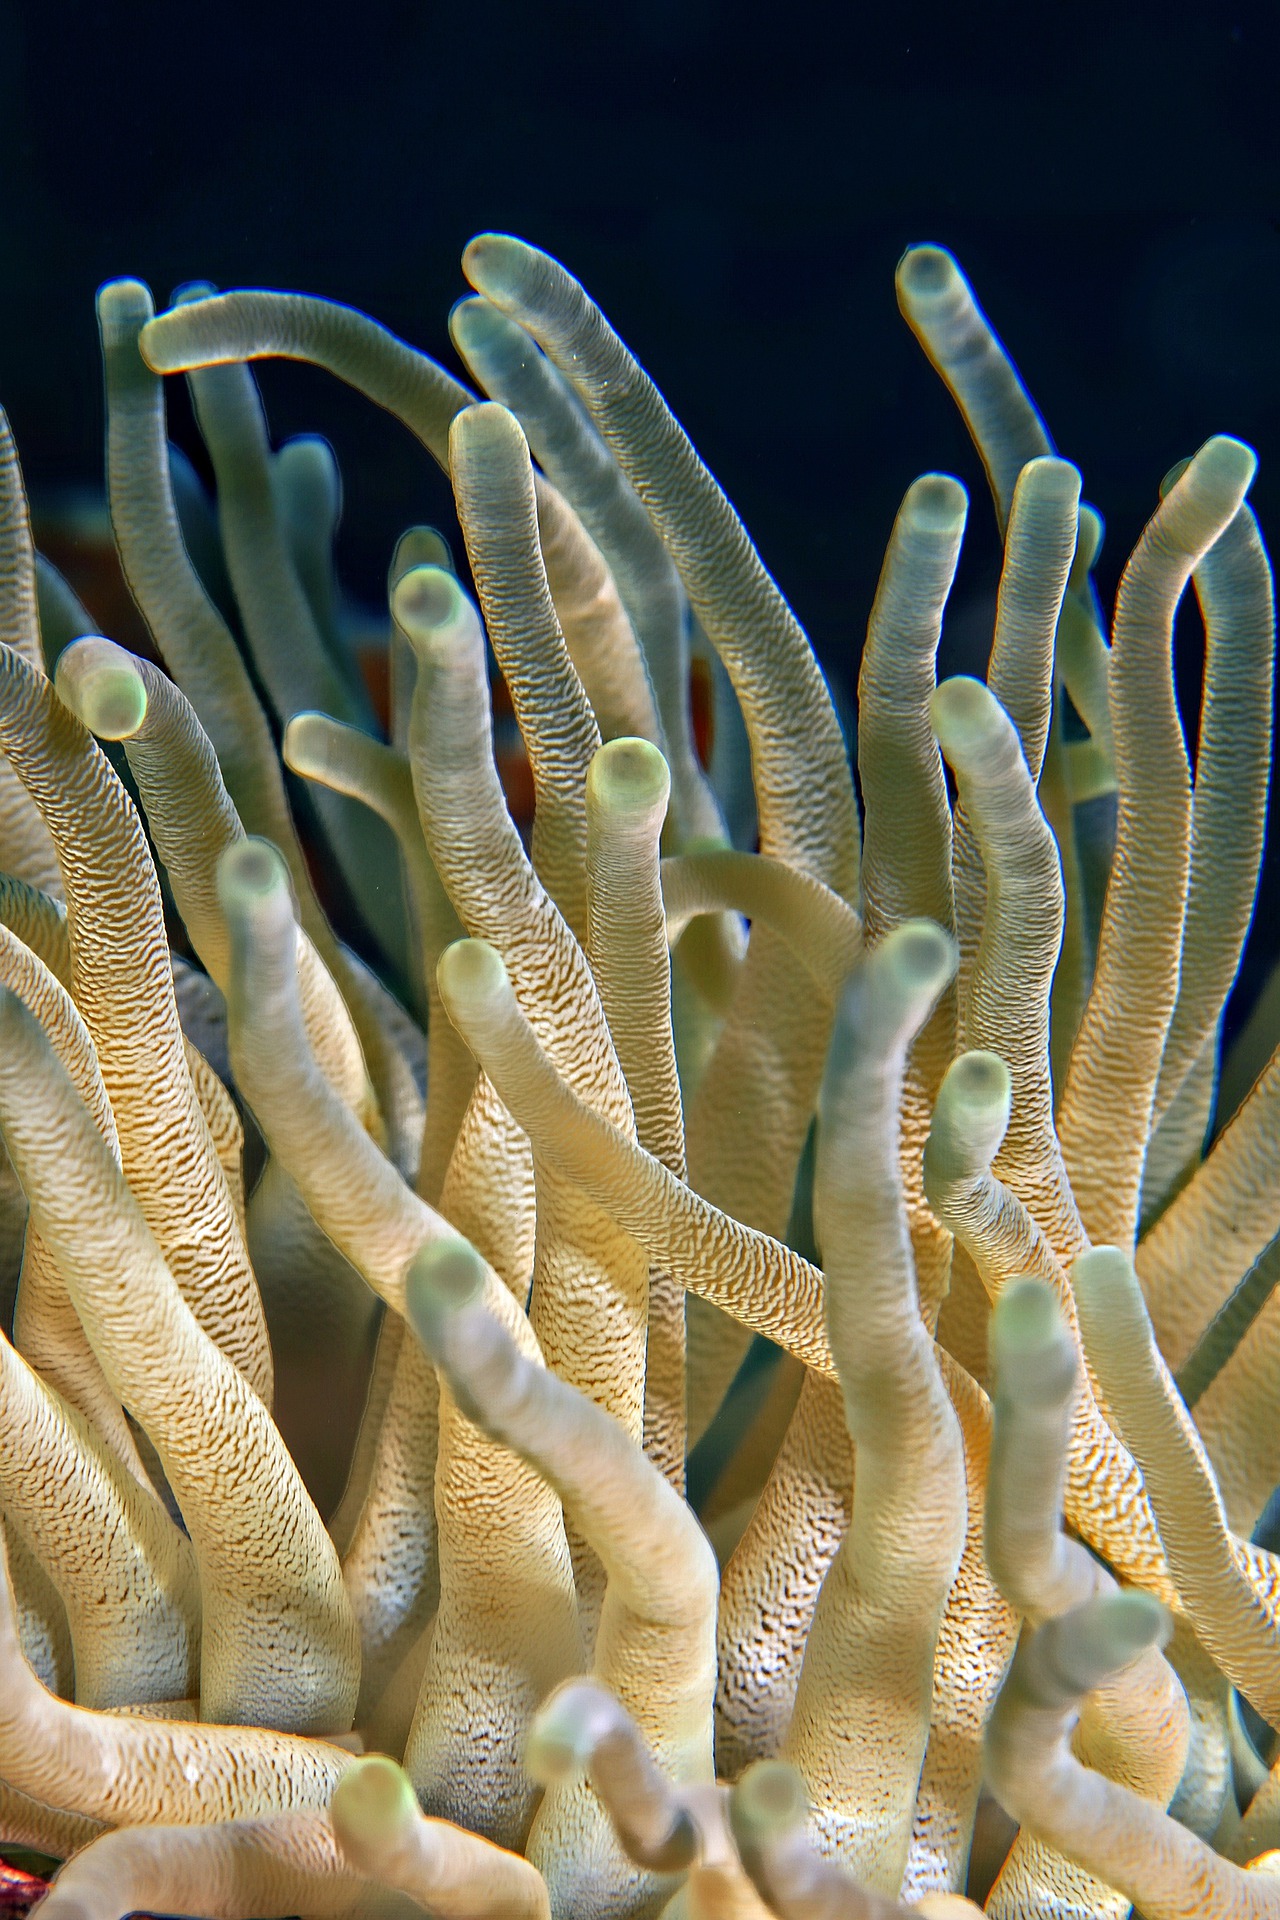 Coral are distant relatives of the type of creatures that were about at this time.